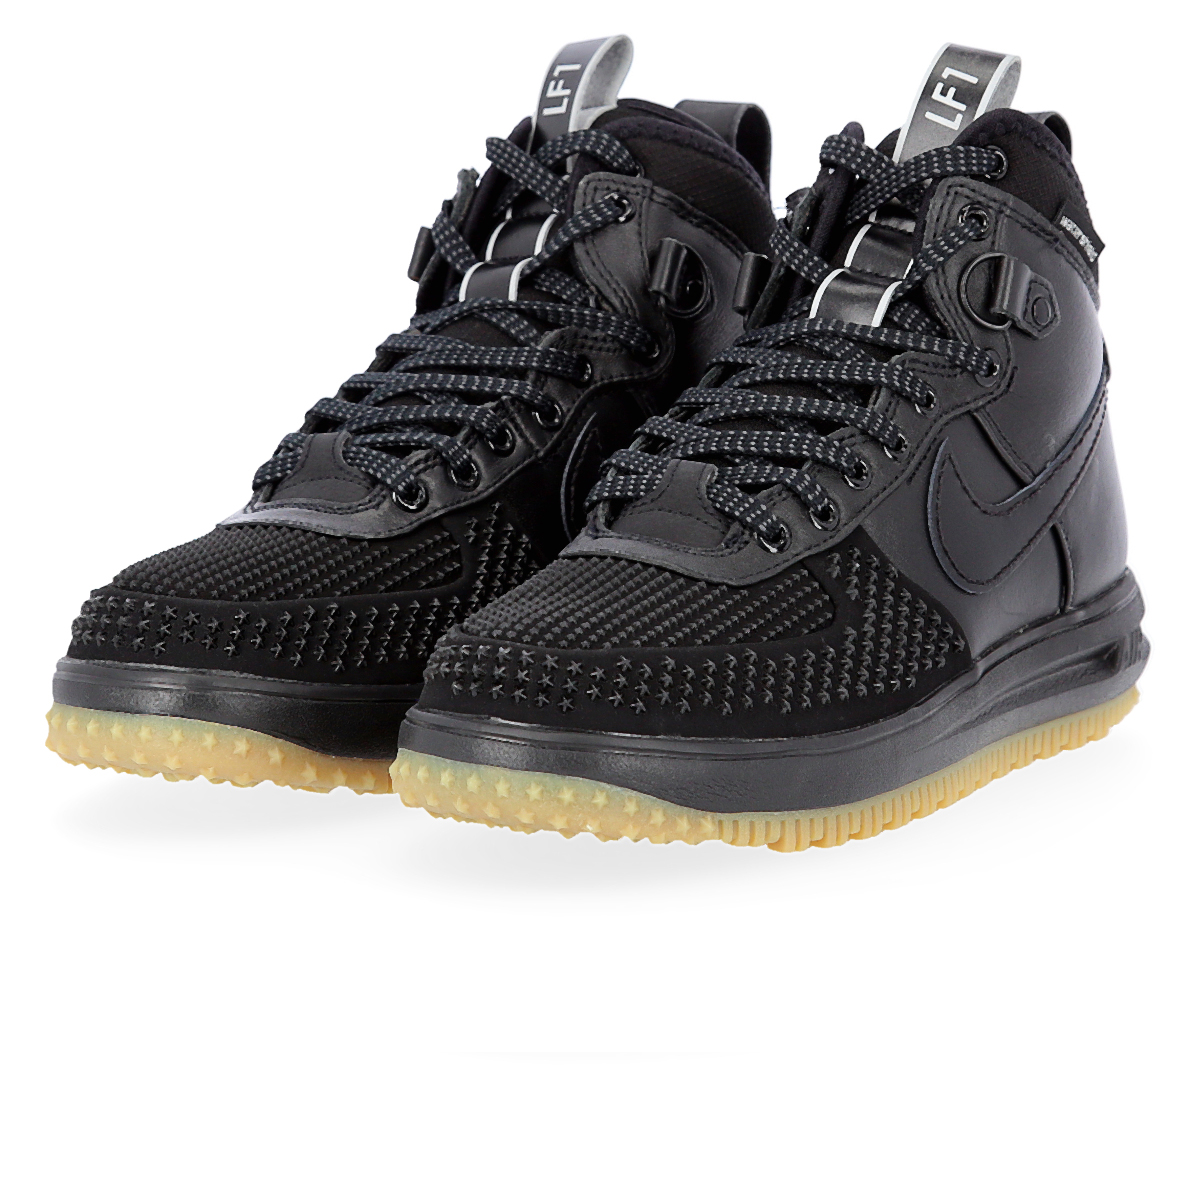 Zapatillas Urbanas Nike Lunar Force 1 Hombre,  image number null